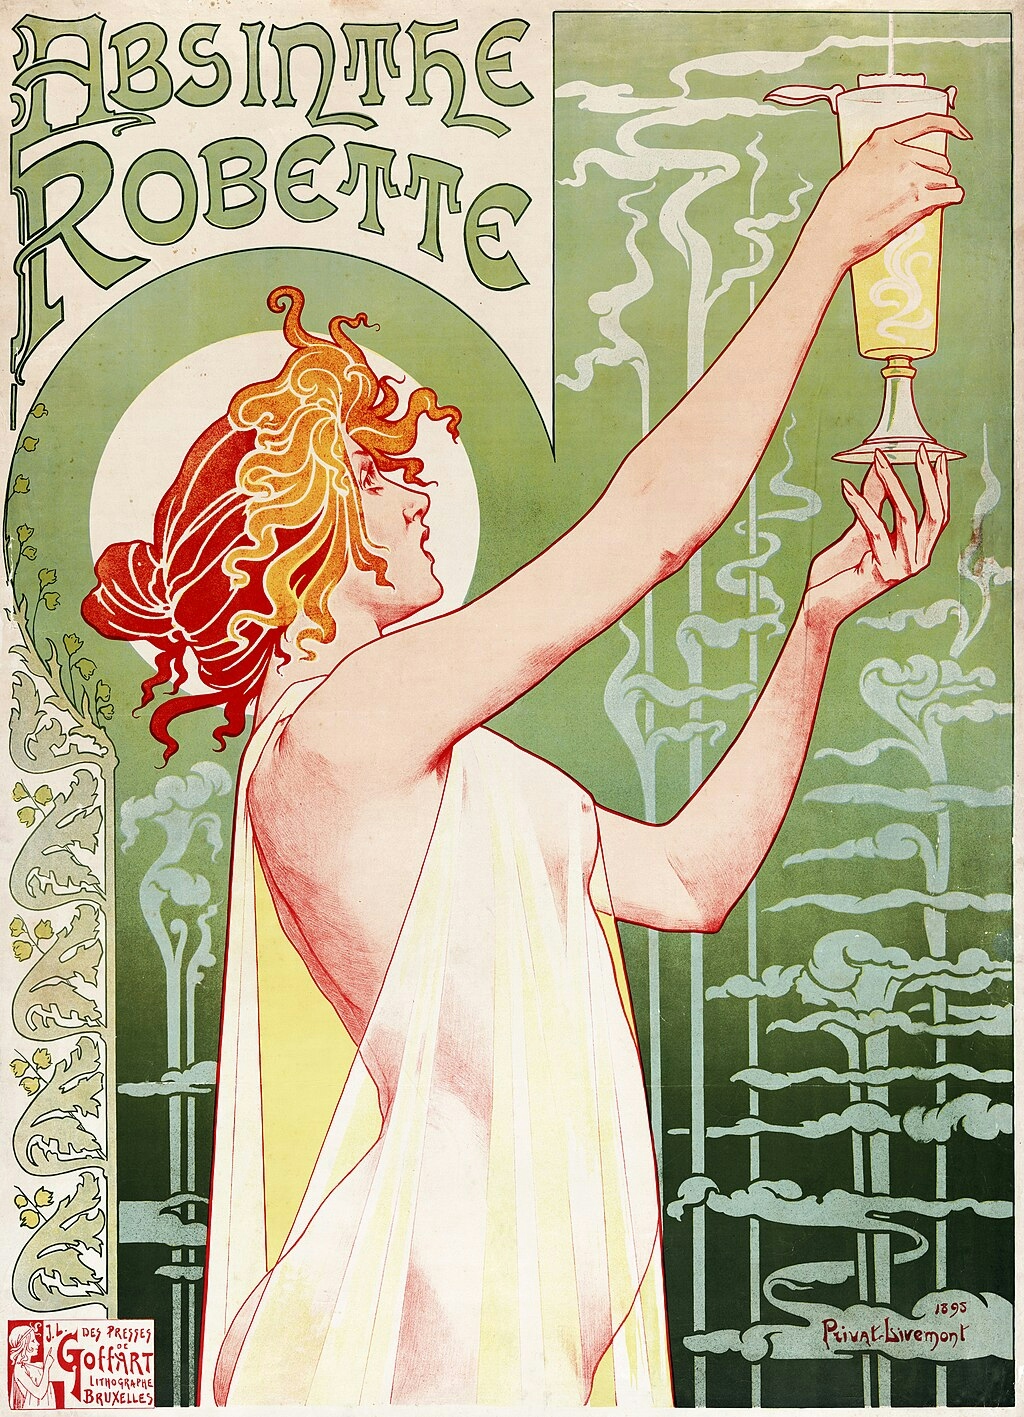 Illustration showing a naked woman against a green background. She is standing, her body loosely draped with see-through white cloth, and is holding a tall glass of absinthe aloft